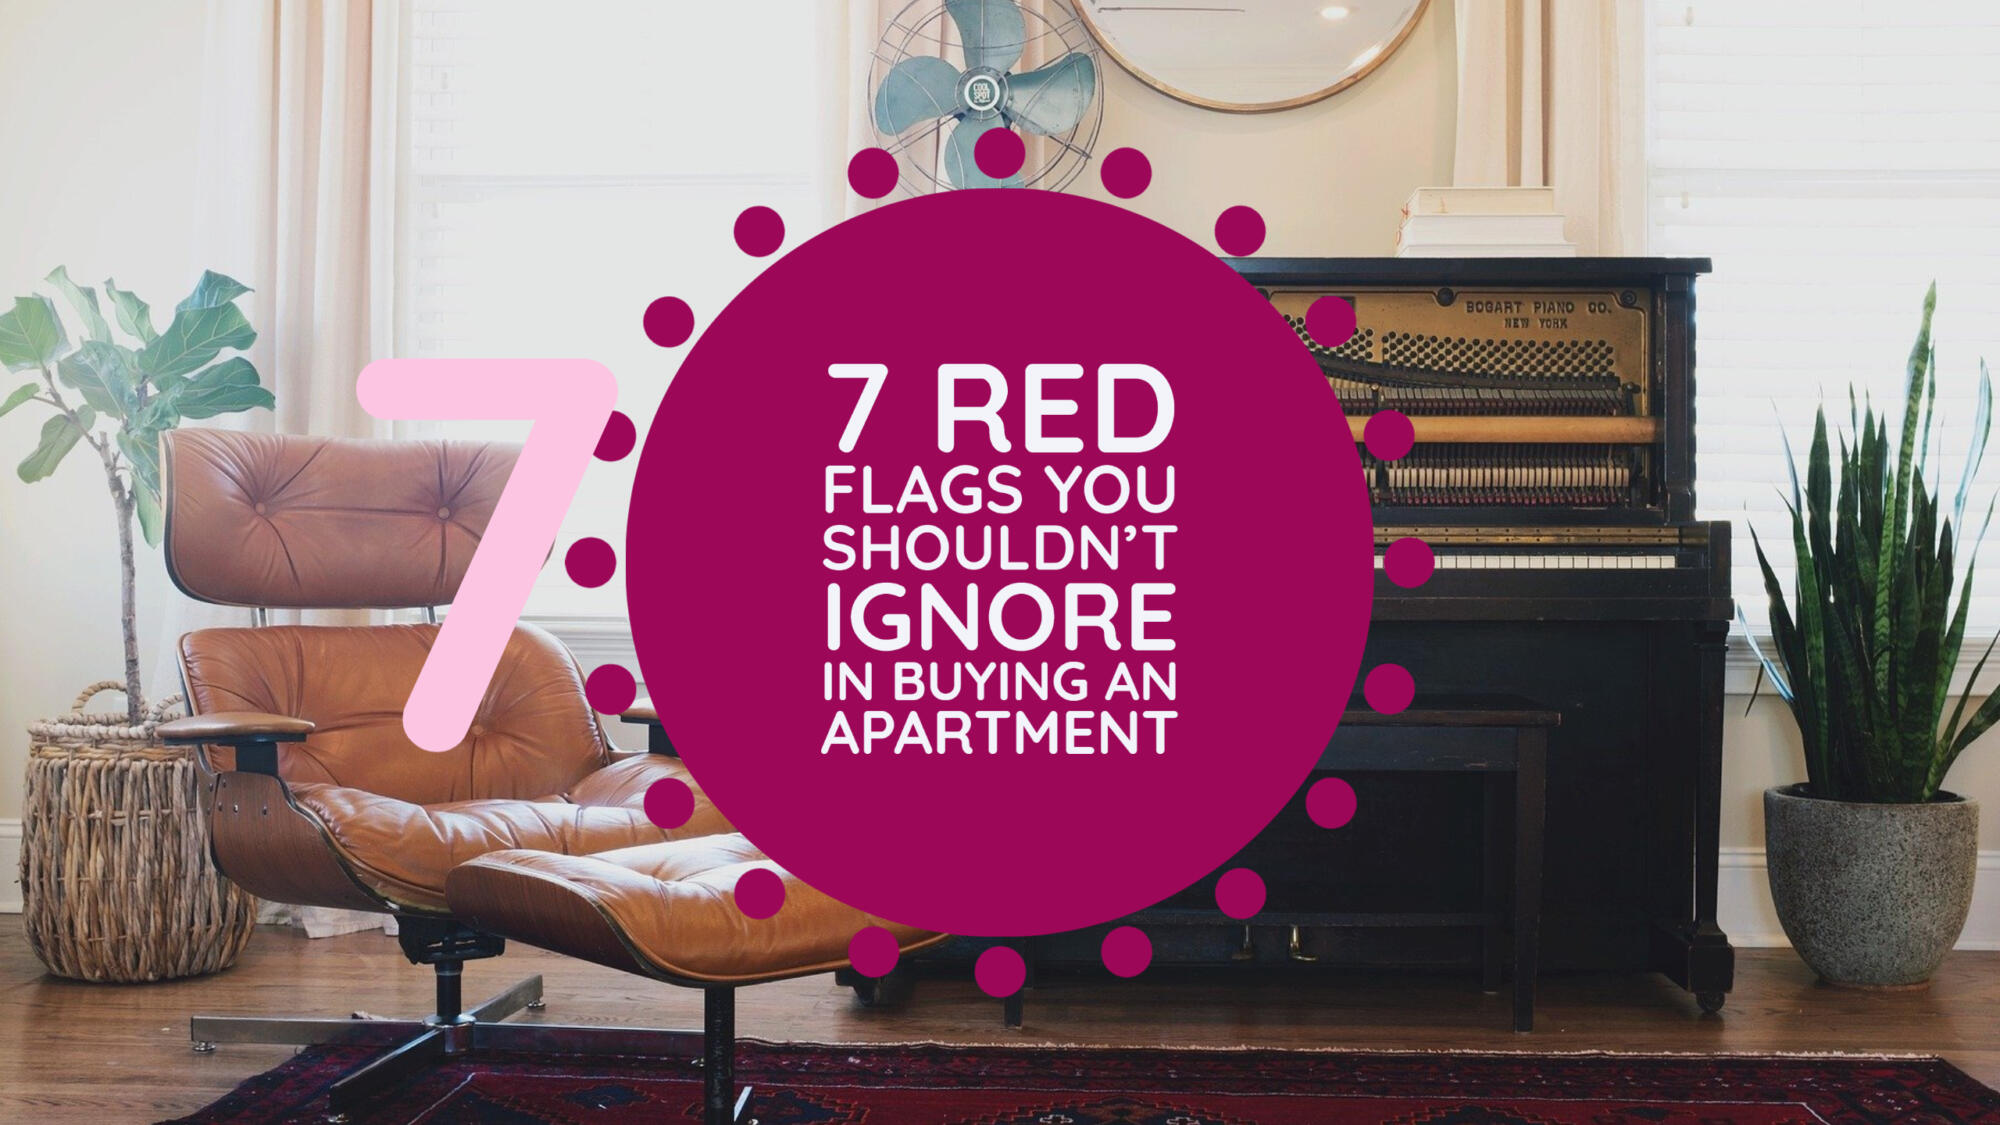 7 Red Flags in Buying an Apartment: Don't Ignore Them!